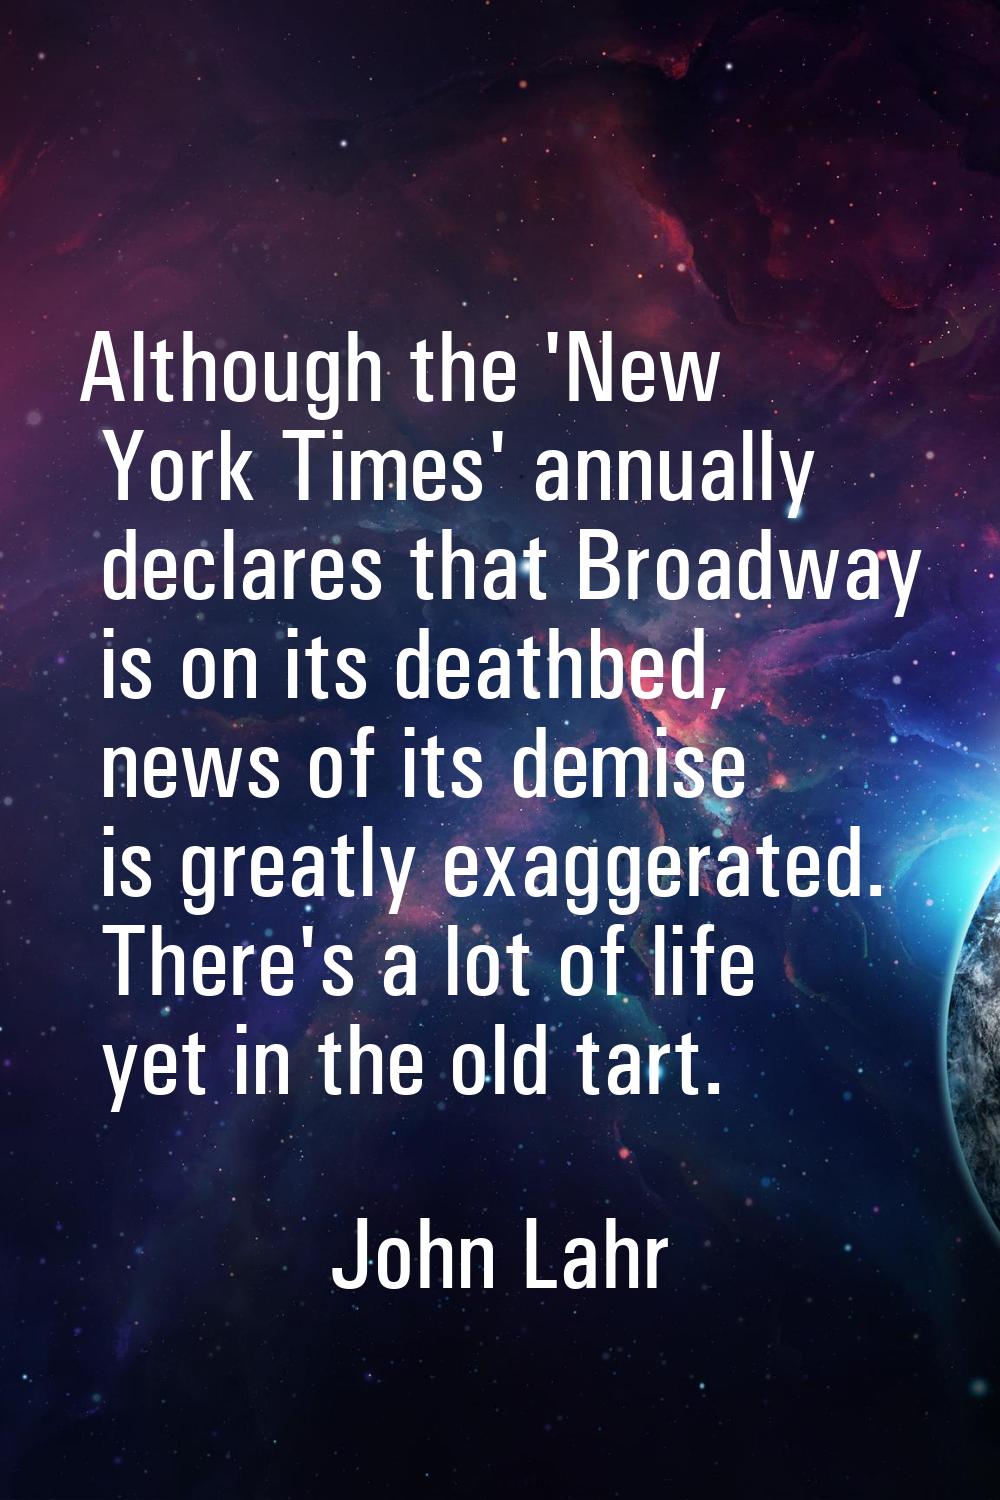 Although the 'New York Times' annually declares that Broadway is on its deathbed, news of its demis